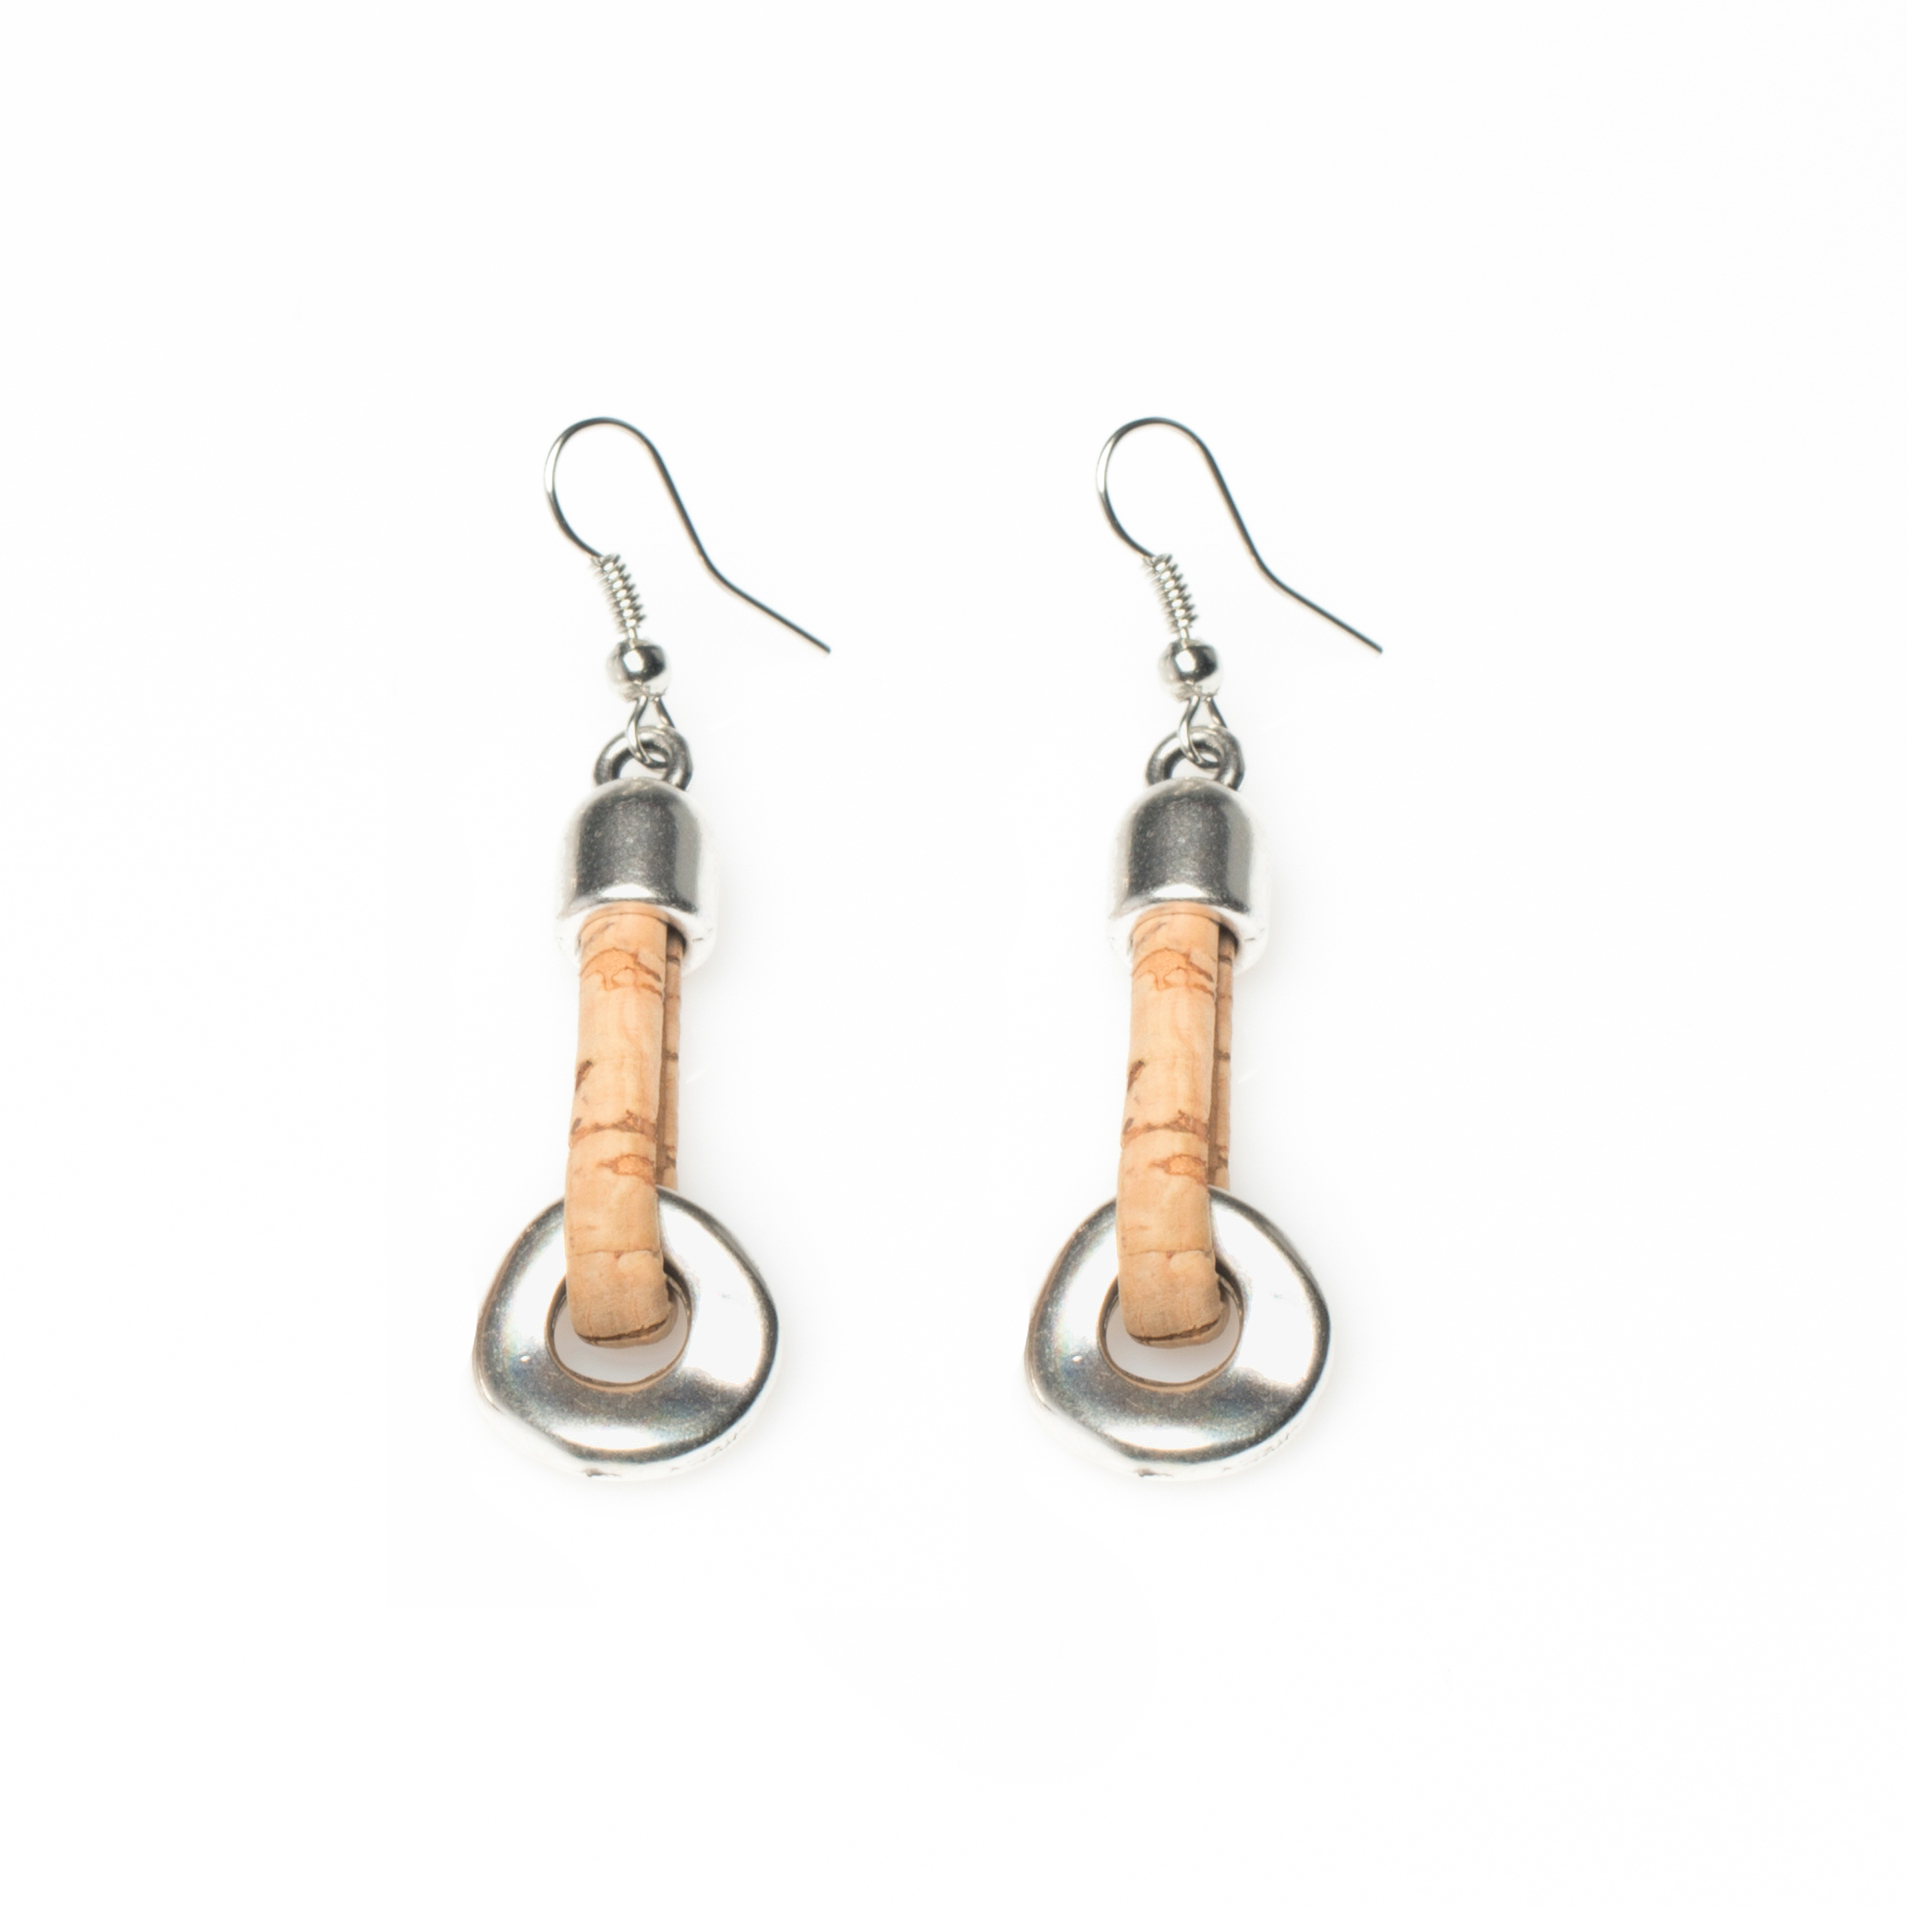 Cork Silver Ring (earrings) - Cork and Company | Made in Portugal | Vegan Eco-Friendly Fashion